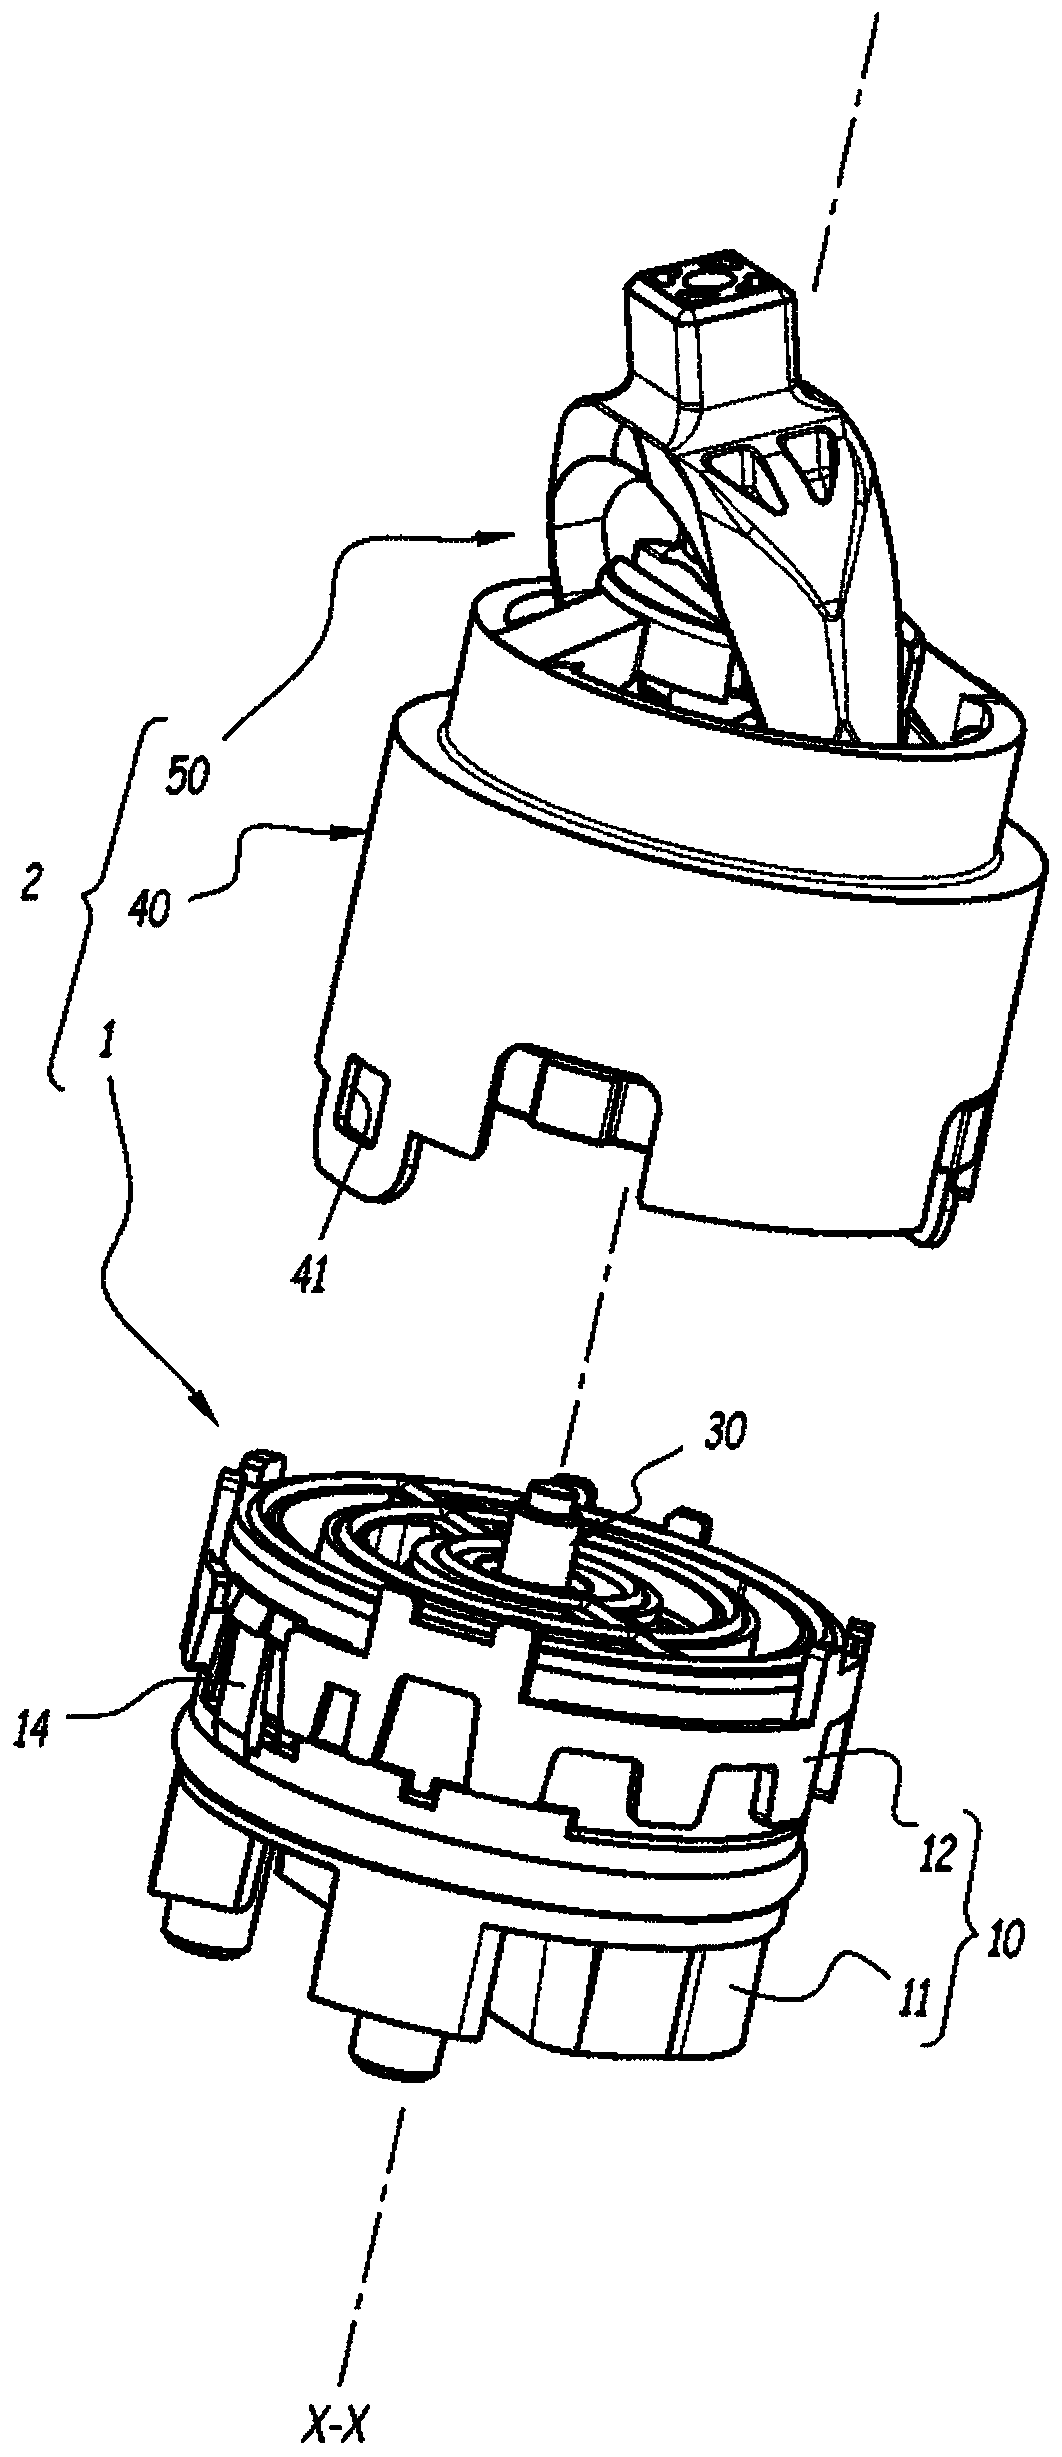 Thermostatic cartridge for regulating cold and hot fluids to be mixed